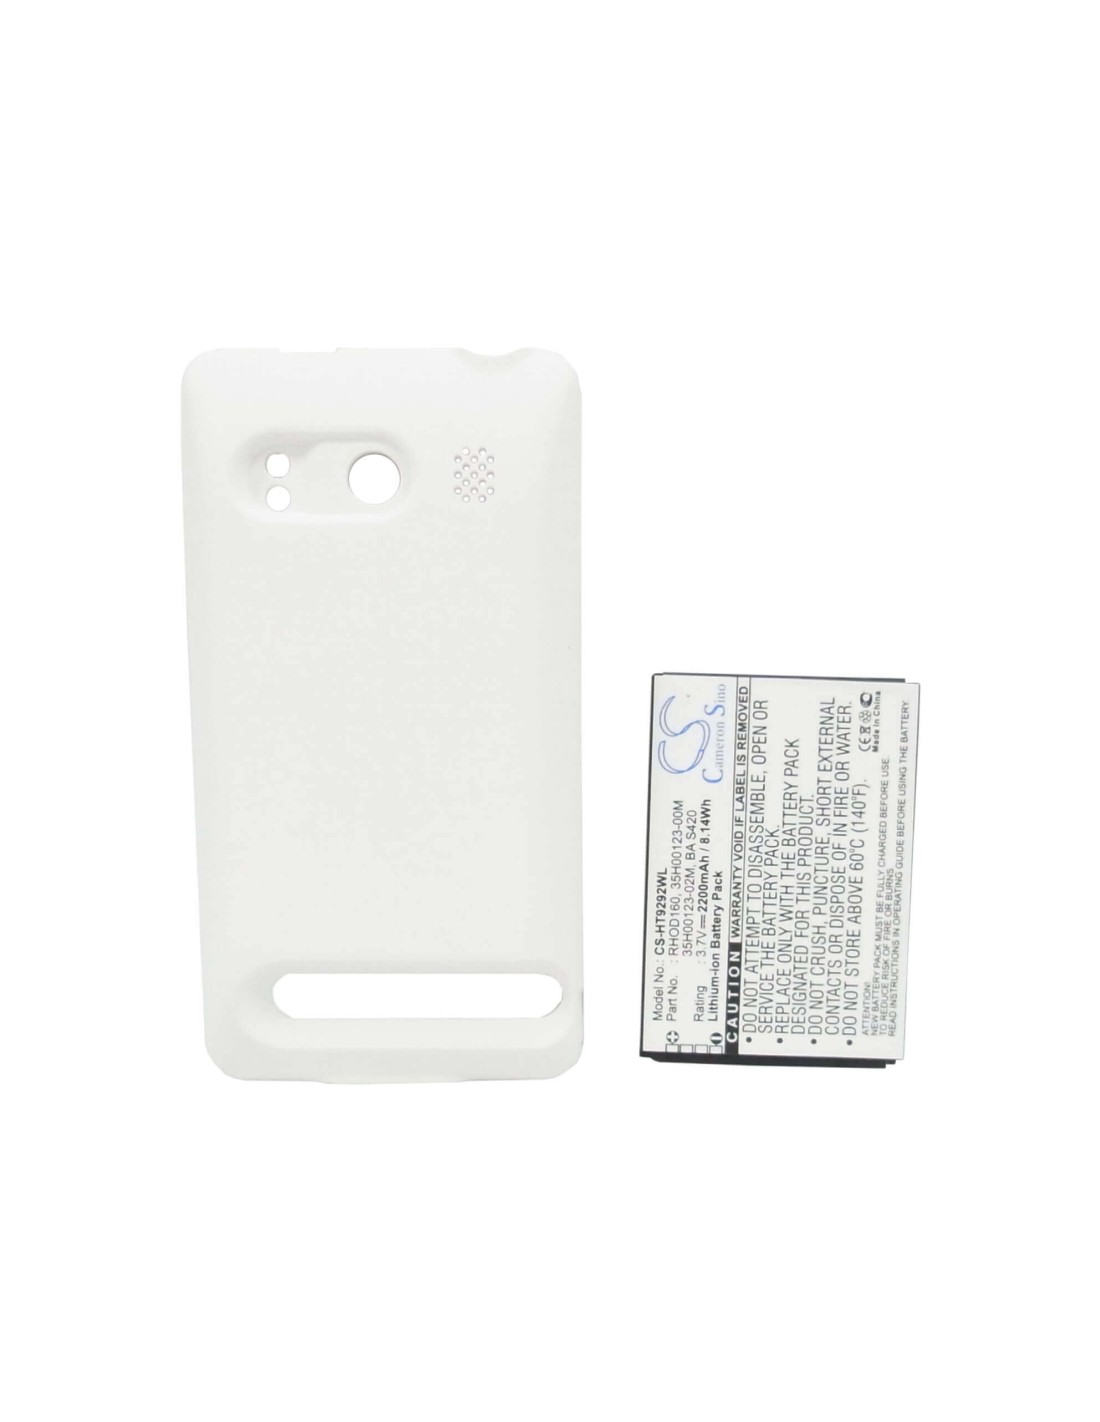 Battery for HTC EVO 4G, A9292, Supersonic, white back cover 3.7V, 2200mAh - 8.14Wh